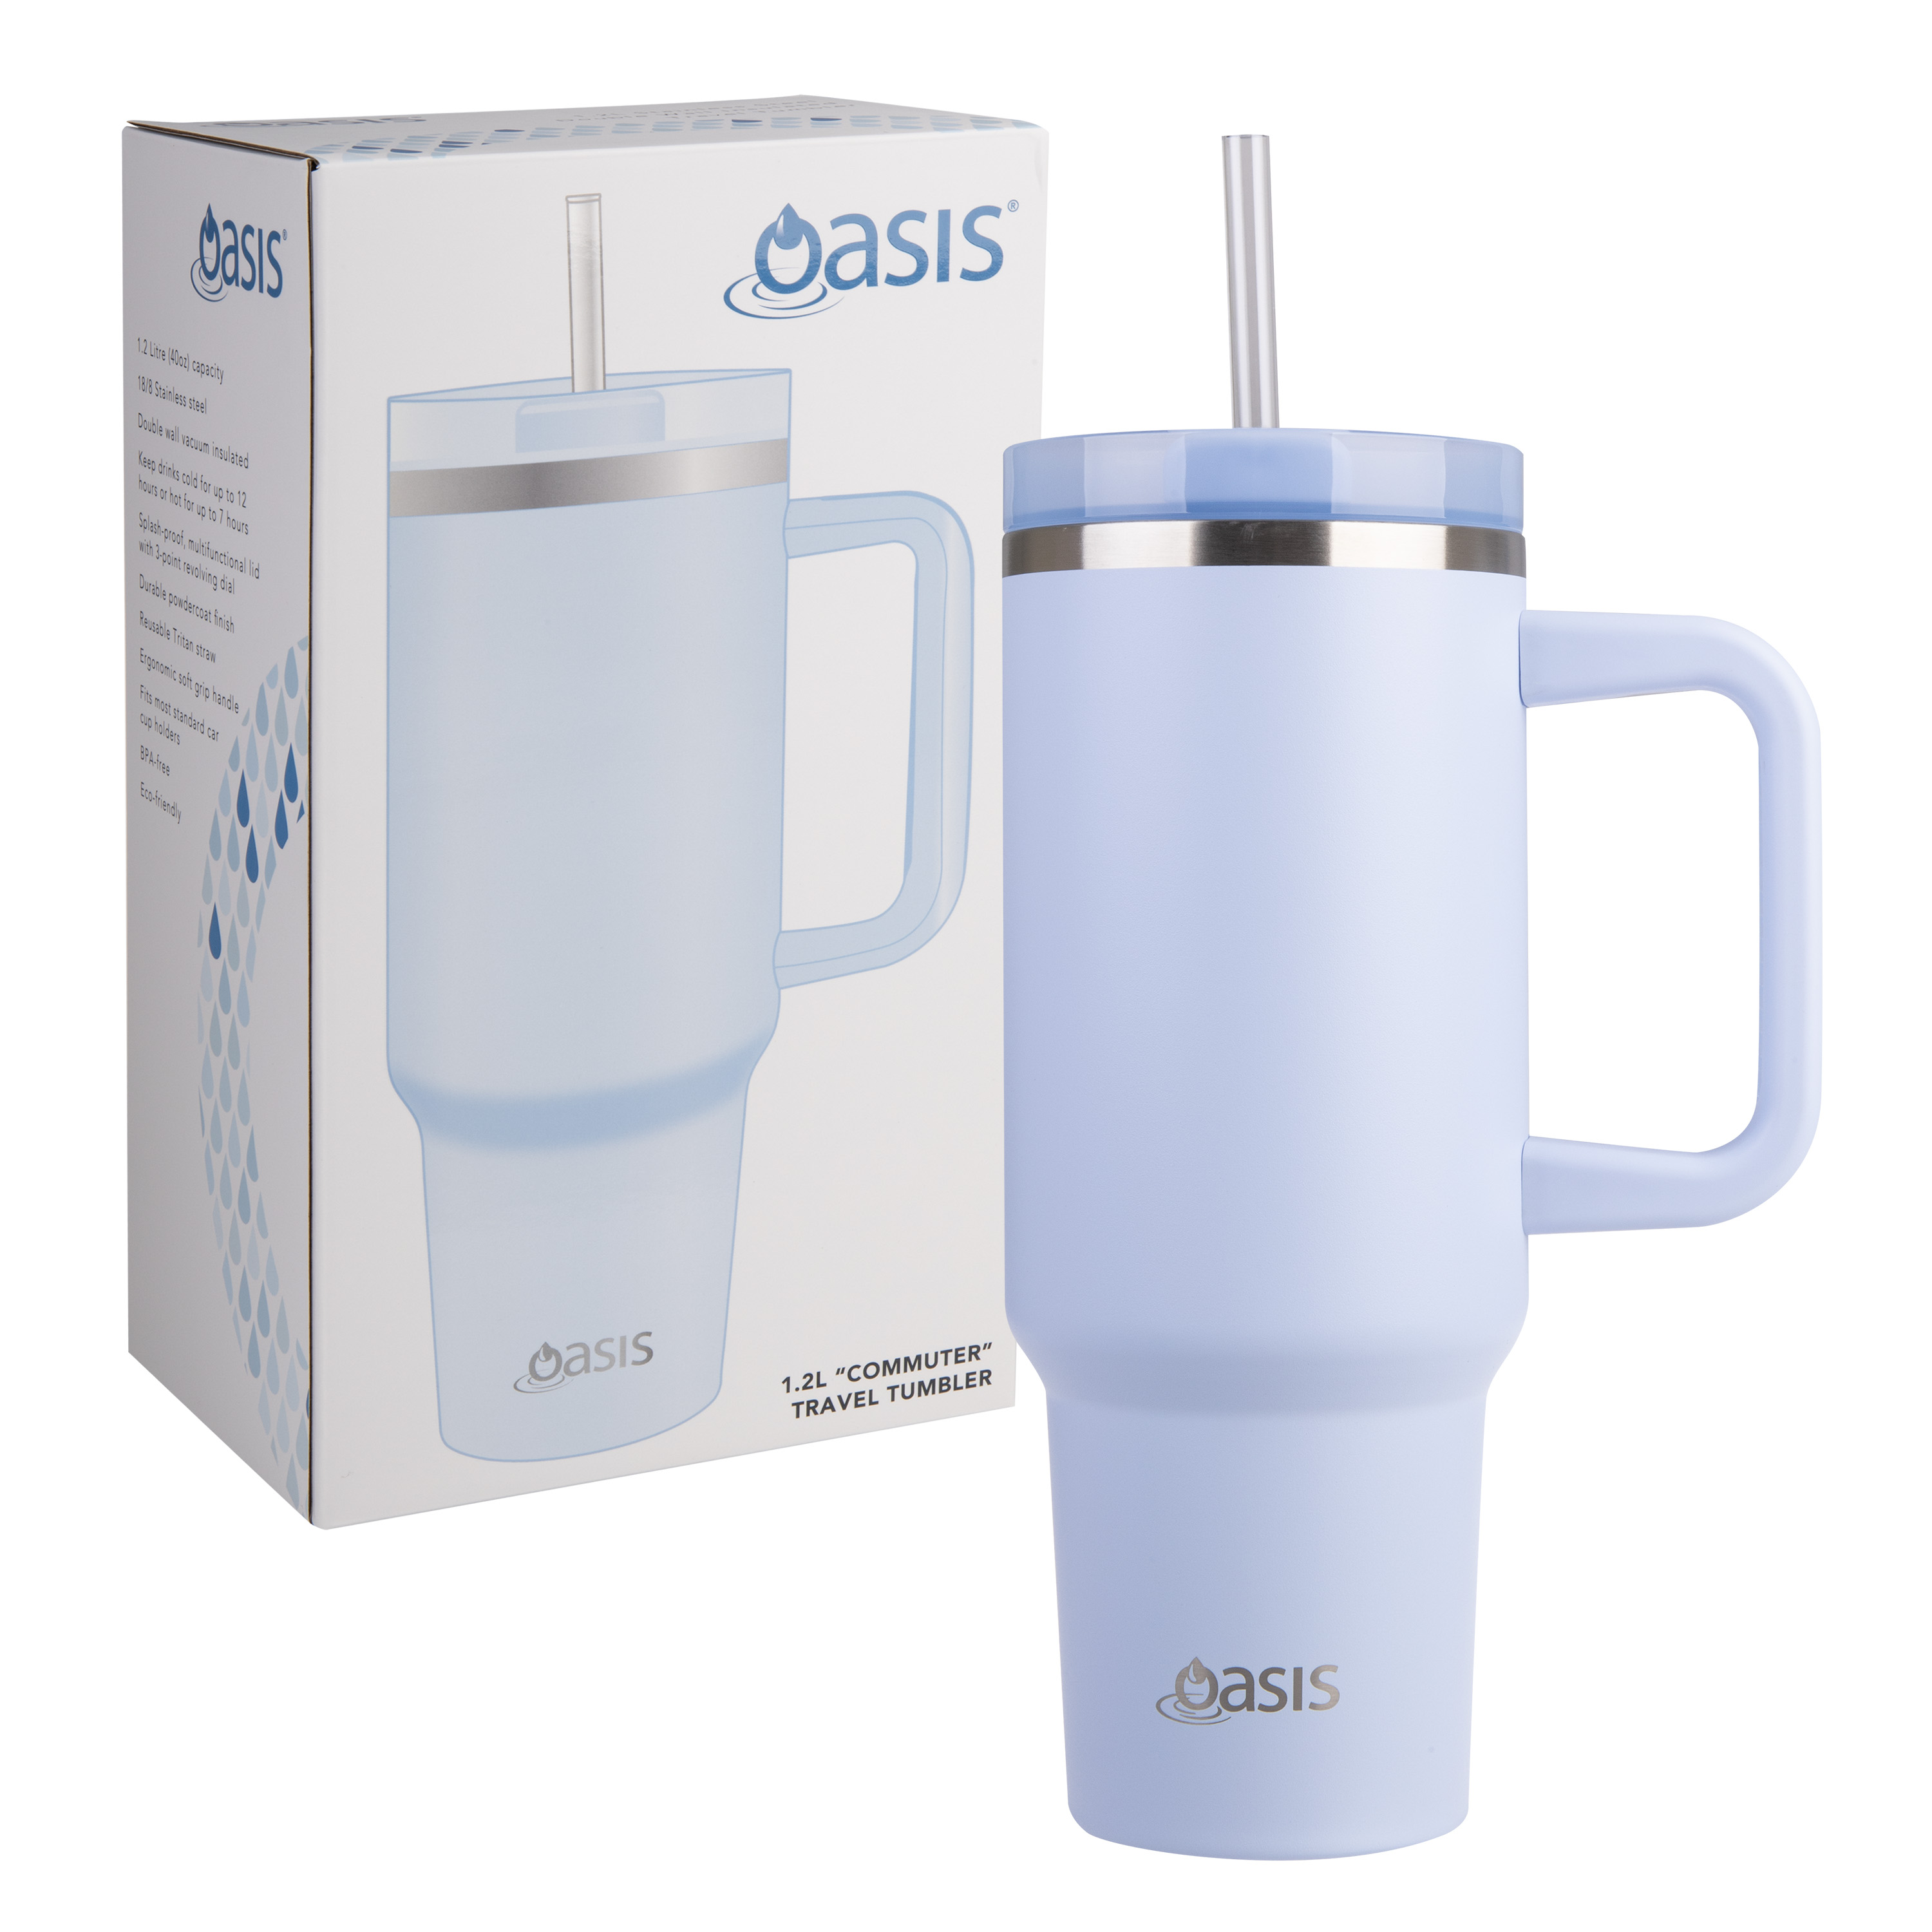 Oasis Stainless Steel Insulated Commuter Travel Tumbler Periwinikle